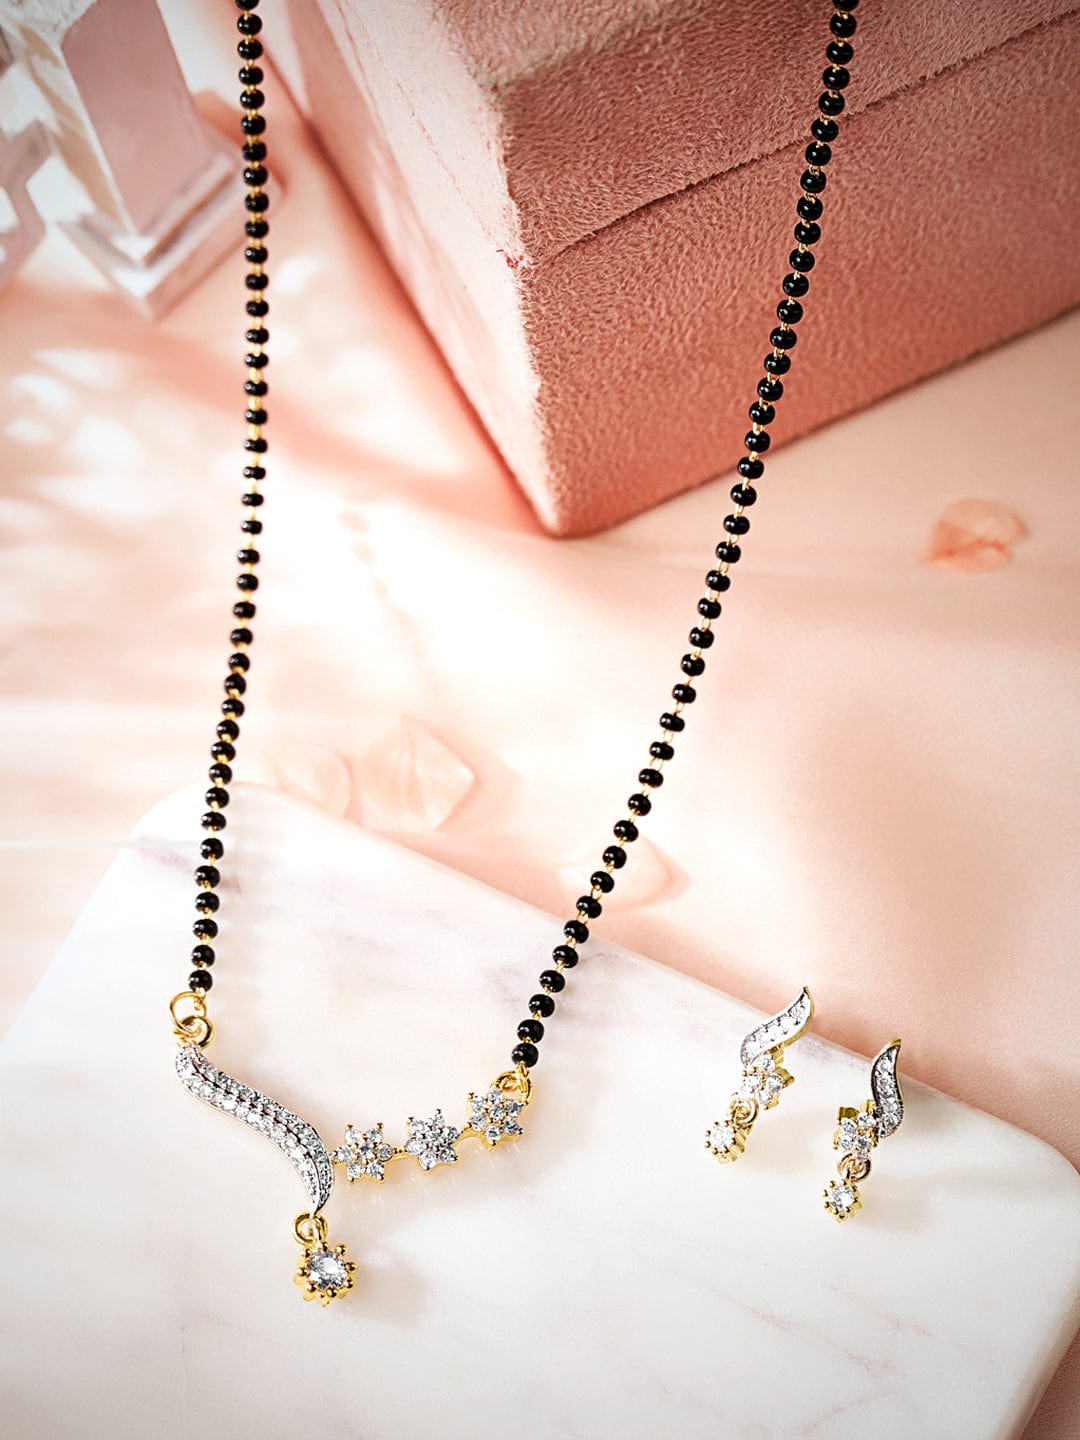 Rubans Black Beaded and Gold Plated Mangal Sutra With White Cz Stones and Earrings Mangalsutra